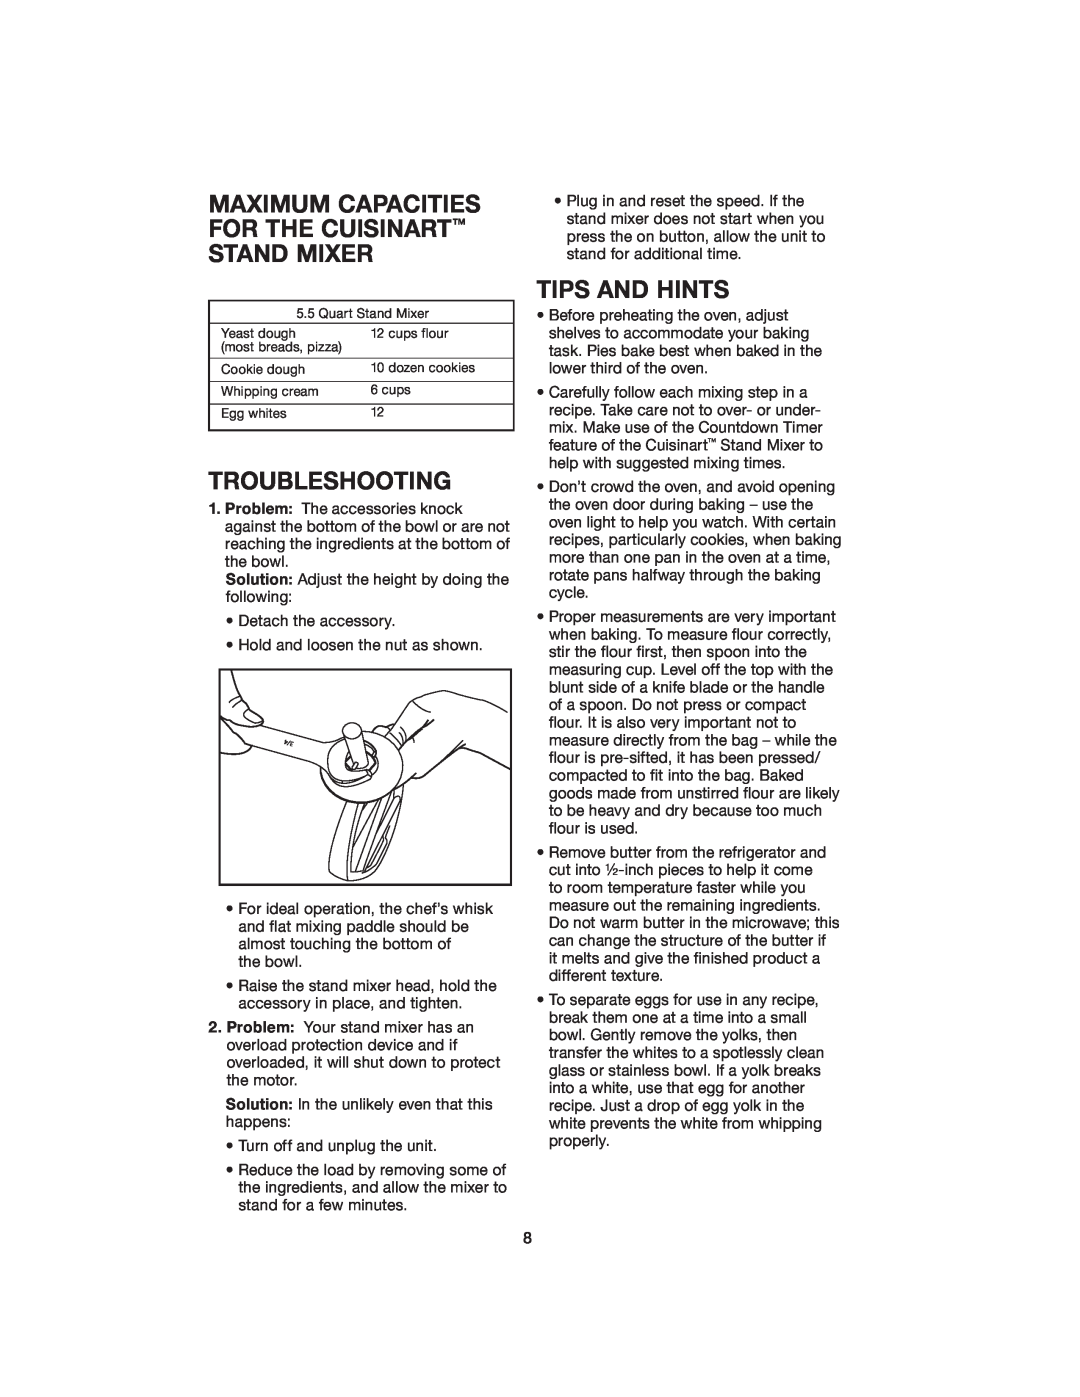 Cuisinart SM-55BK manual Troubleshooting, Tips And Hints, Maximum Capacities For The Cuisinart Stand Mixer 